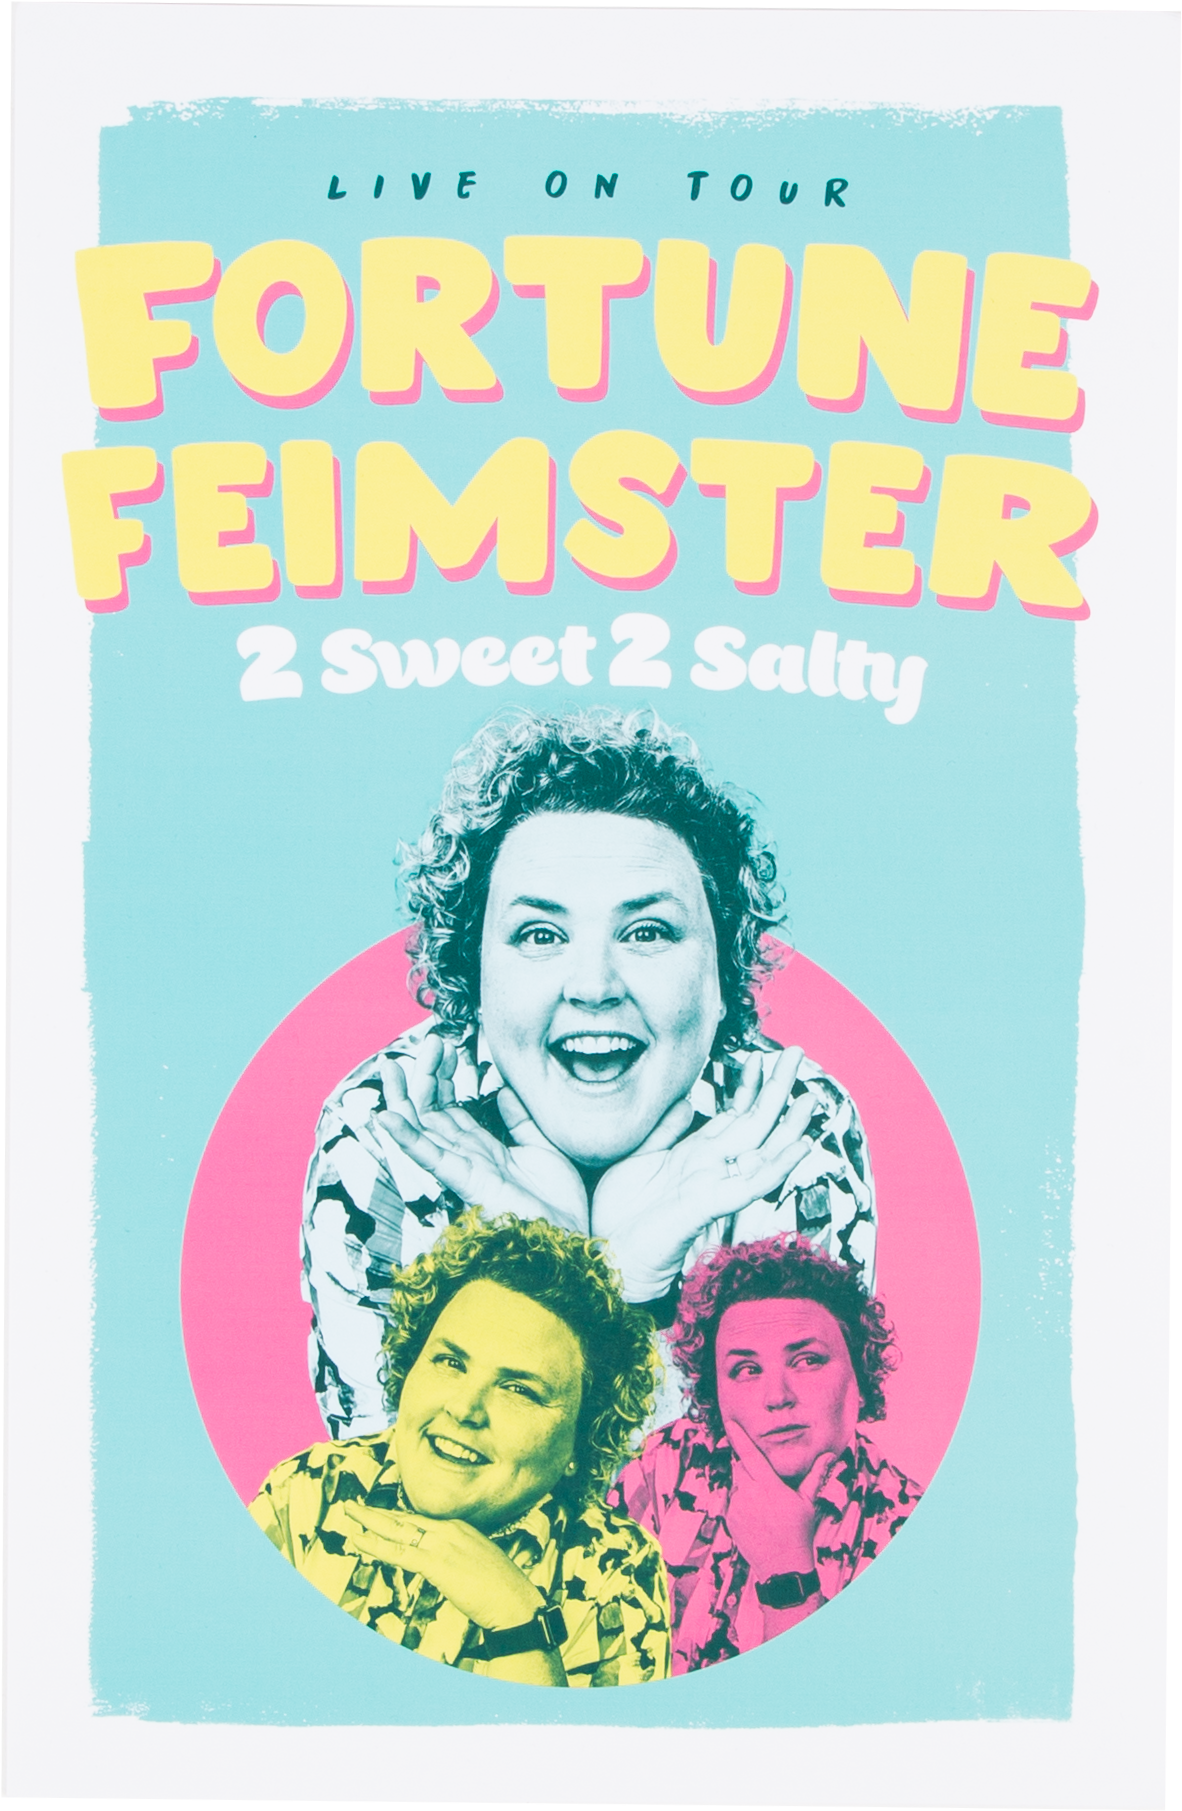 Fortune's 2 Sweet 2 Salty Tour poster!